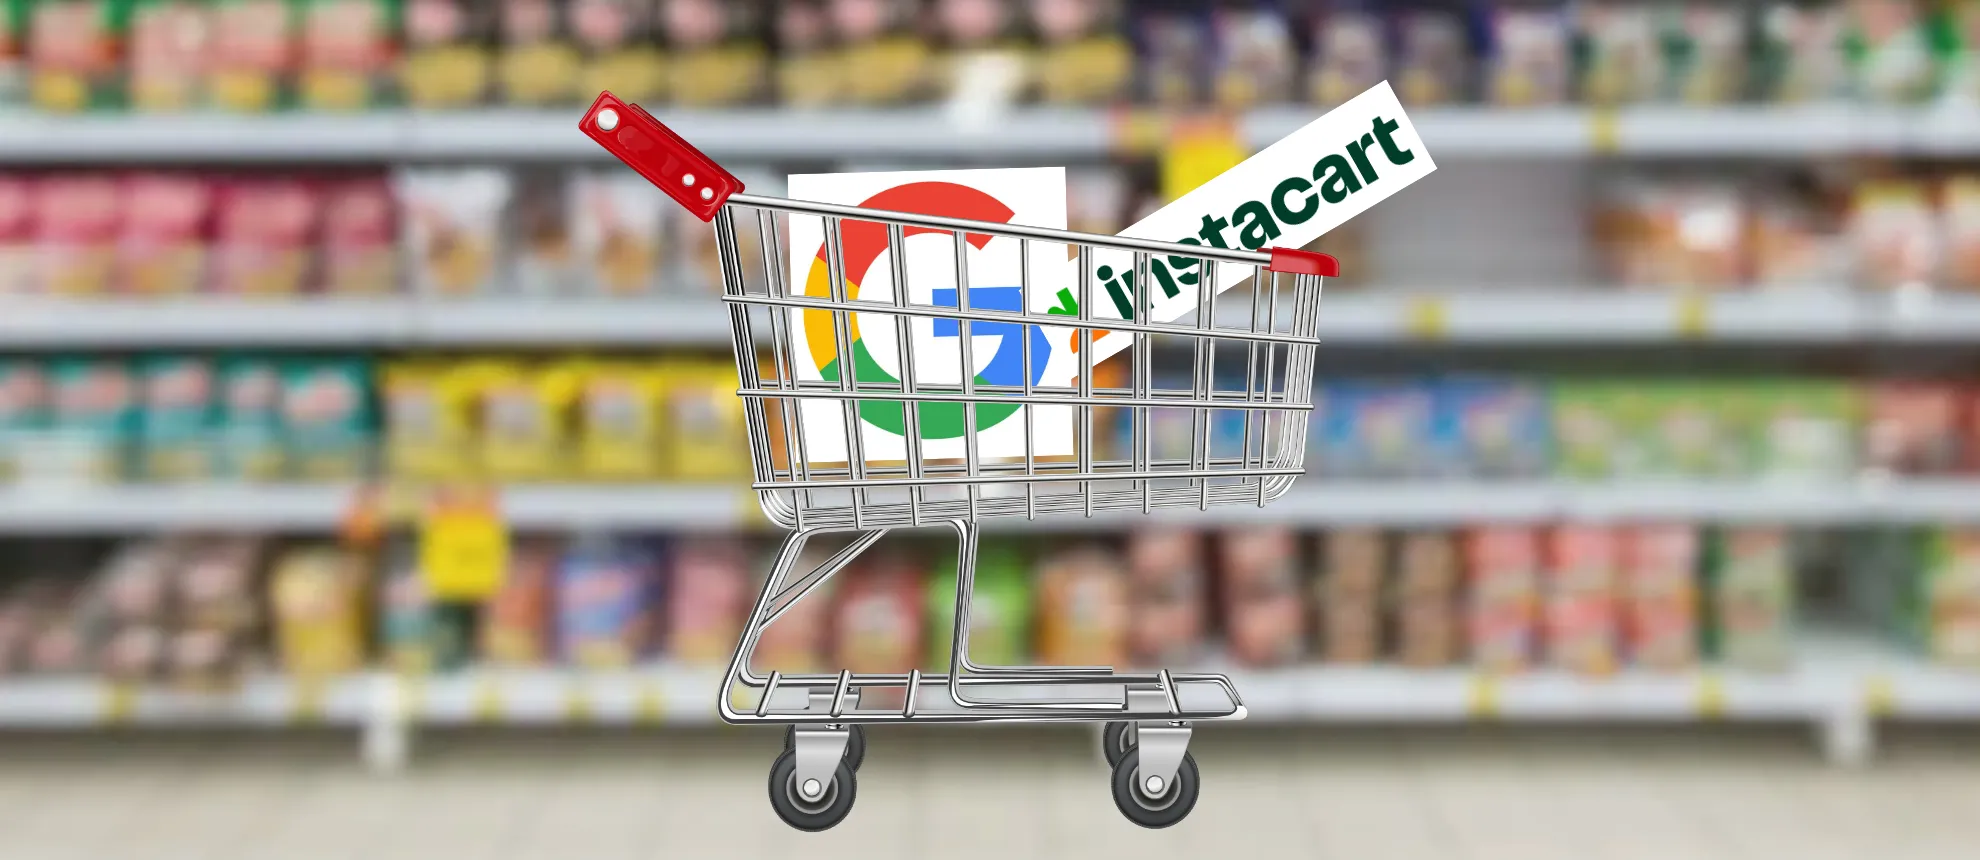 Retail Media is growing illustrated by this image representing the 2024 Retail Media partnership between Instacart and Google